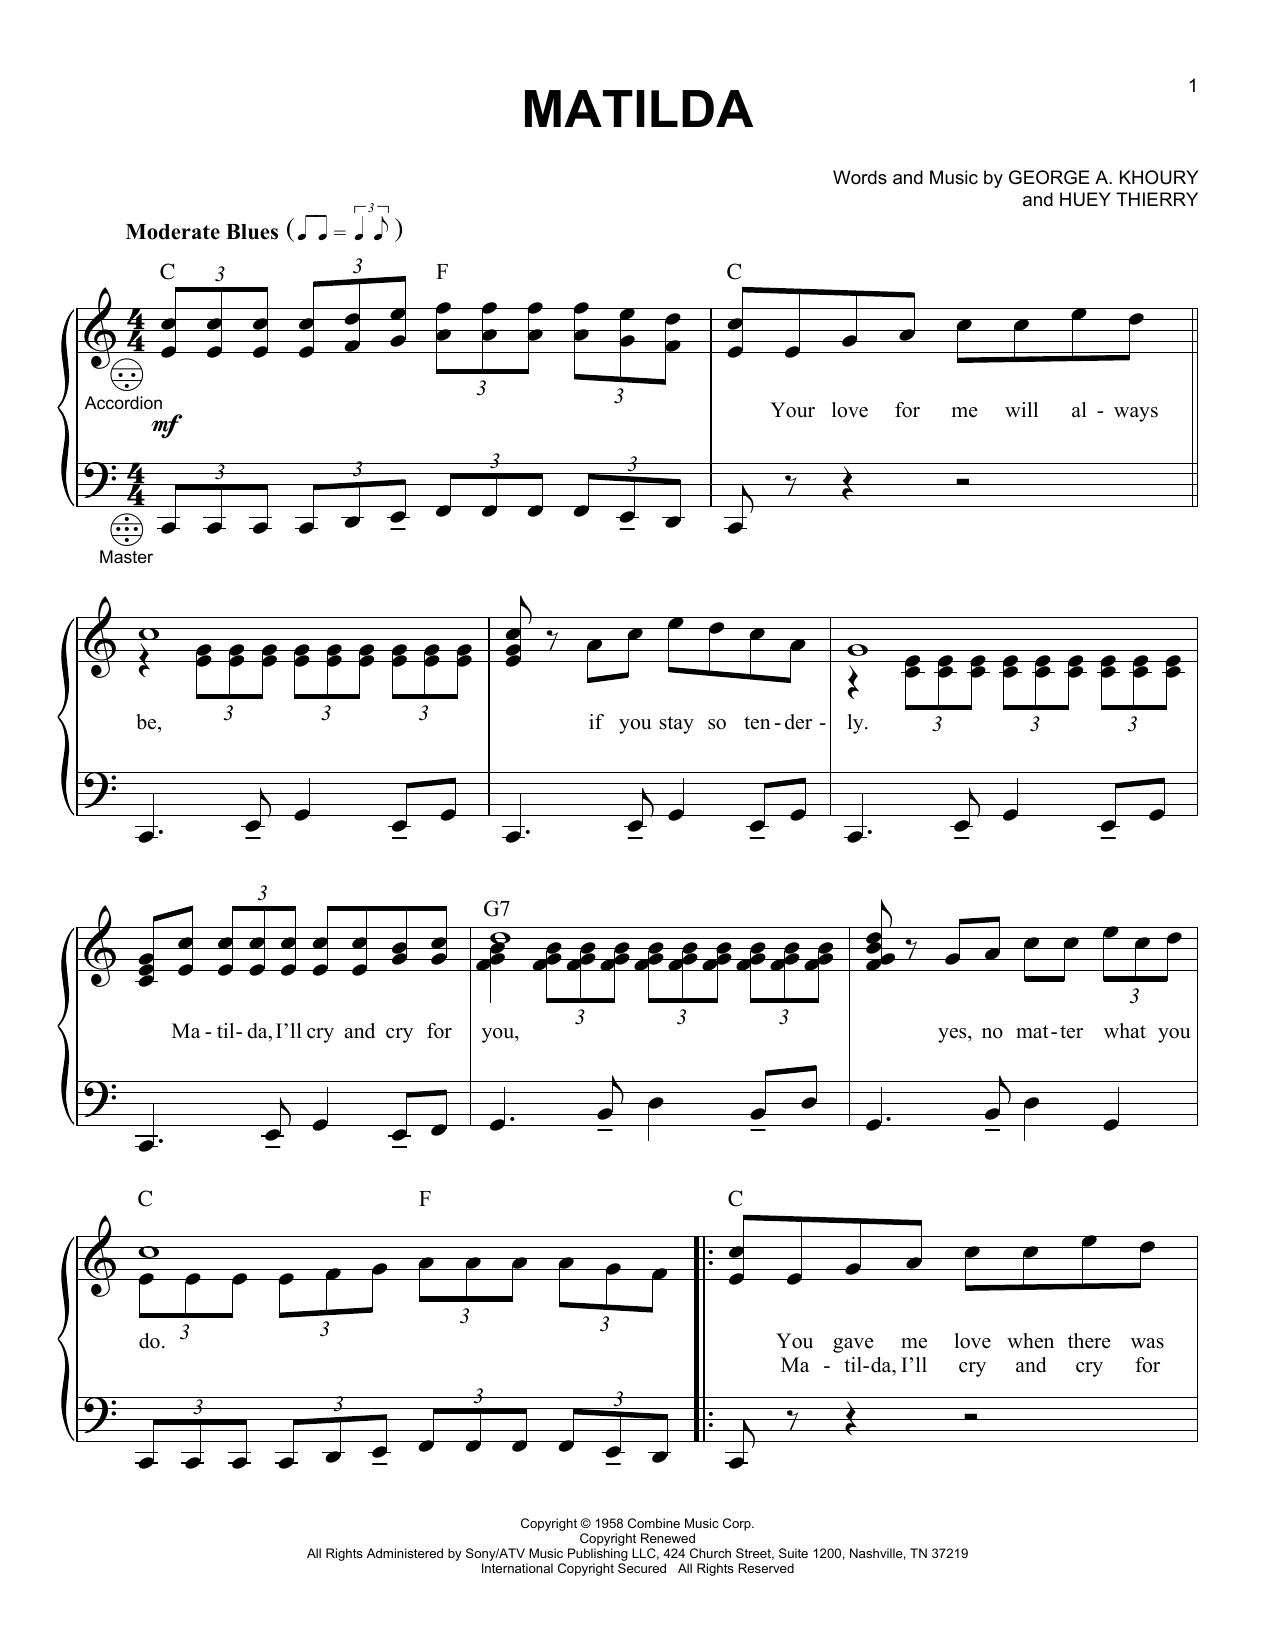 George A. Khoury Matilda sheet music notes and chords. Download Printable PDF.